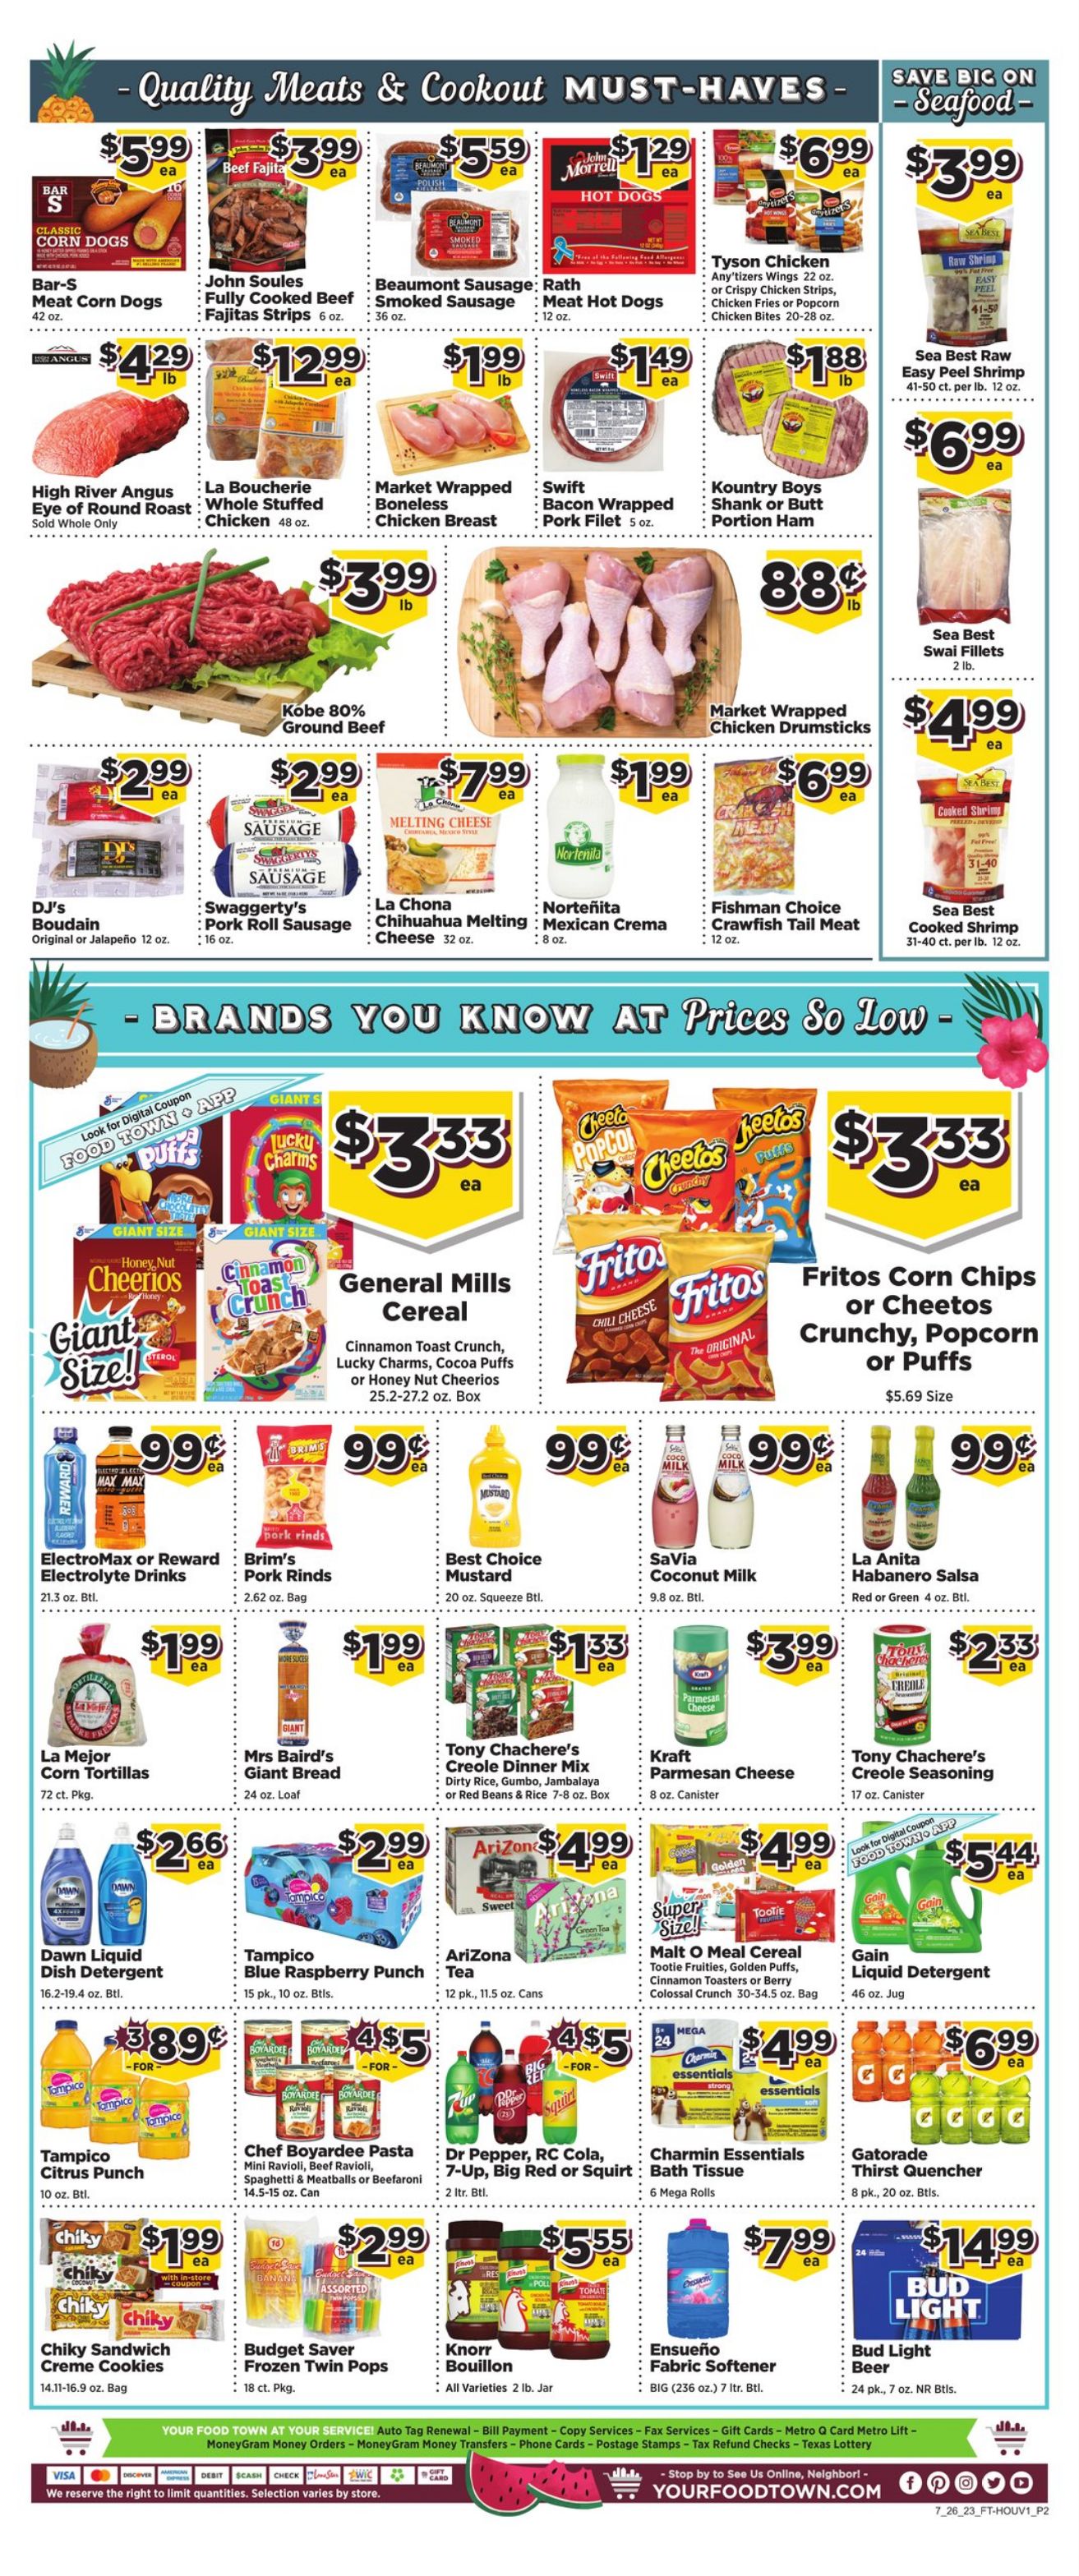 Weekly ad Your Food Town 07/26/2023 - 08/01/2023